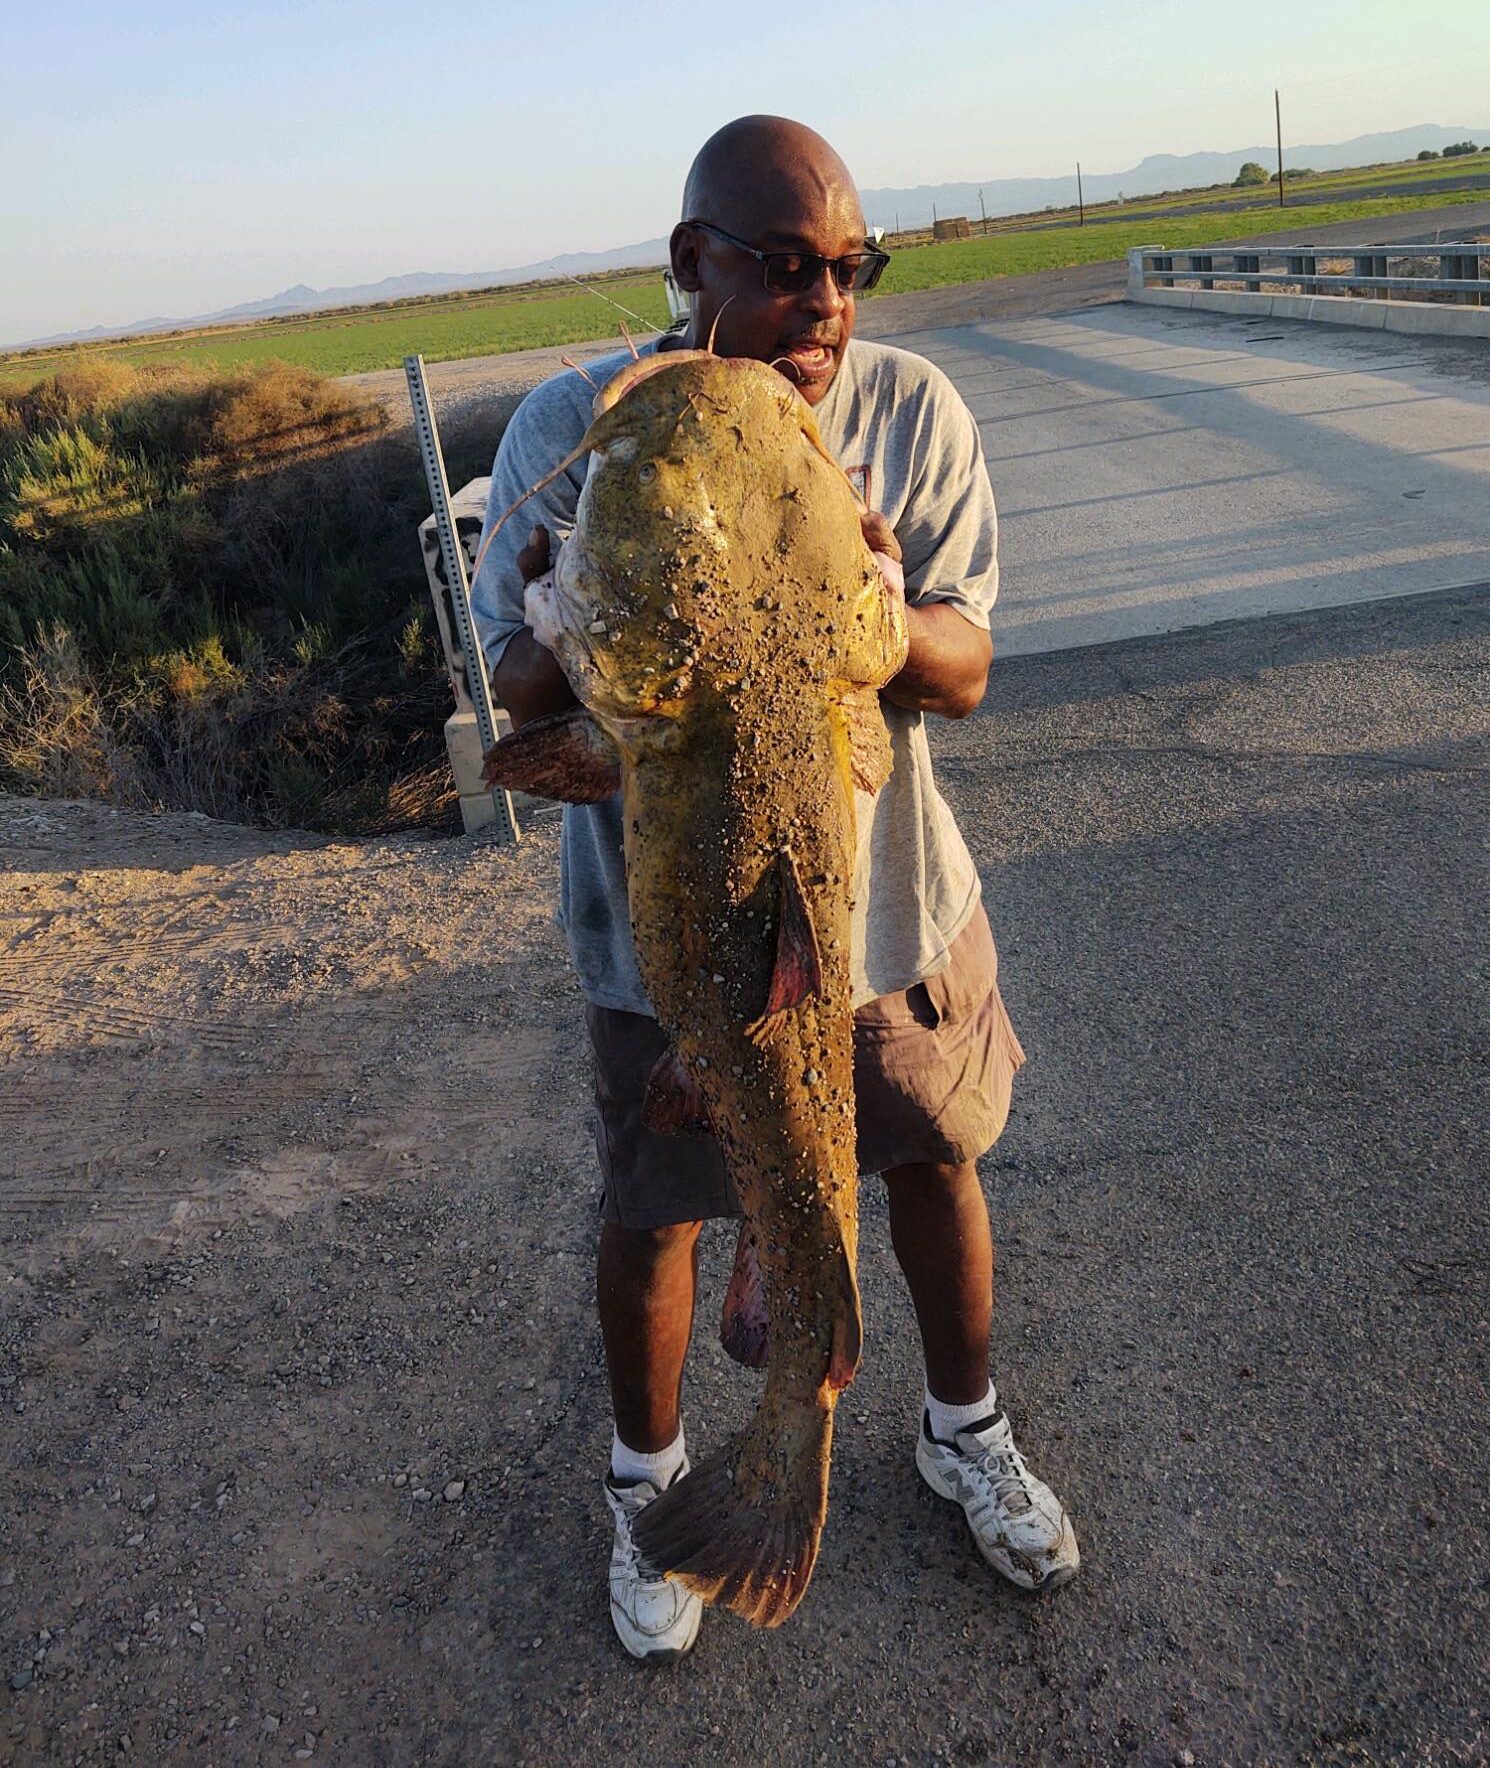 This 80-pound Arizona flathead catfish was cut up for a fish fry.